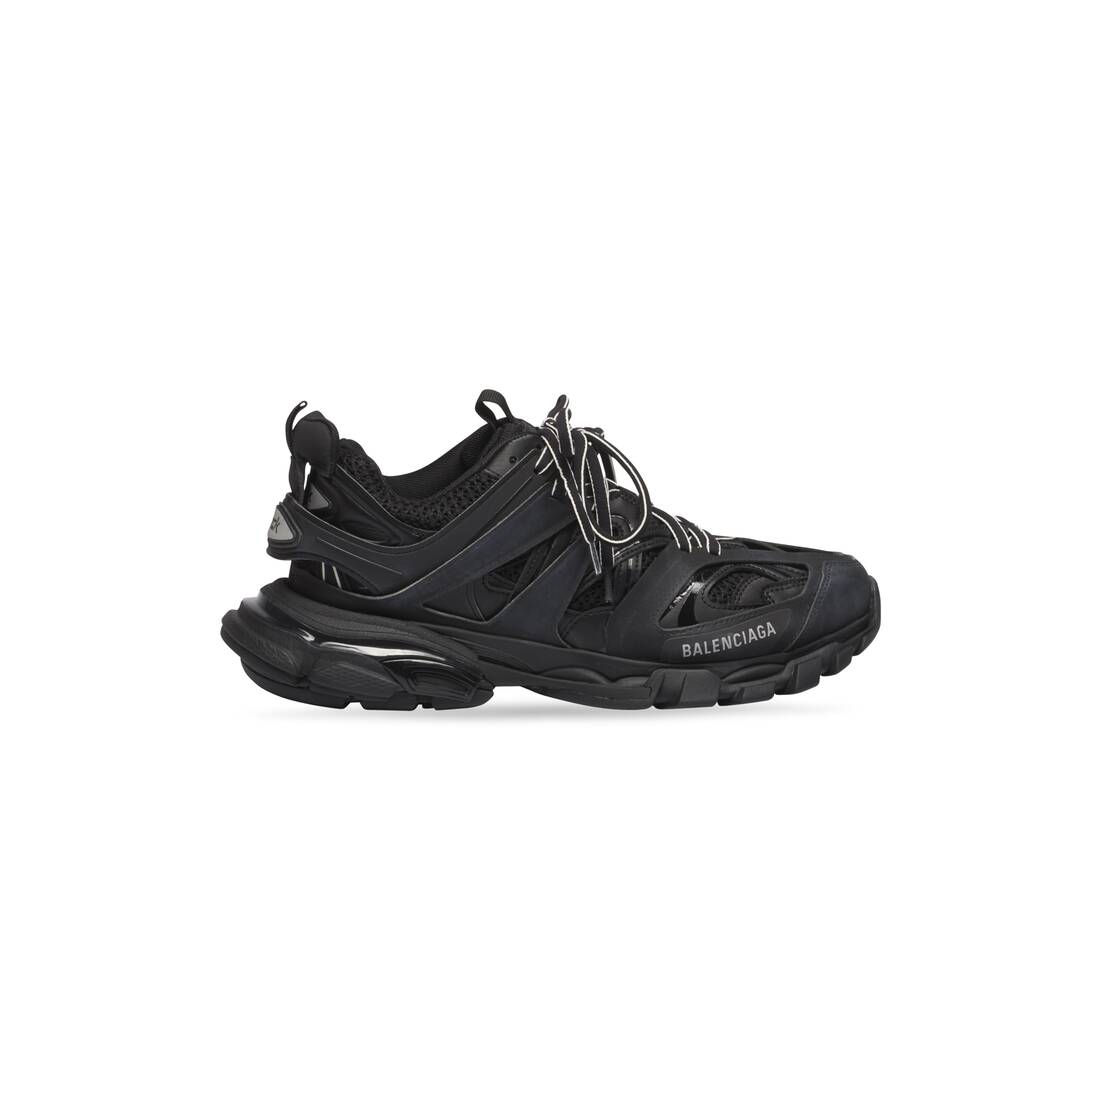 Track Led Tracks 3.0 Sneakers Womens Mens Trainers Luxury Casual Shoe  Hoodie Tess.S. Gomma Leather All Black White Nylon Printed Platform Shoes  Z7Wb# From Airdunk, $87.19 | DHgate.Com